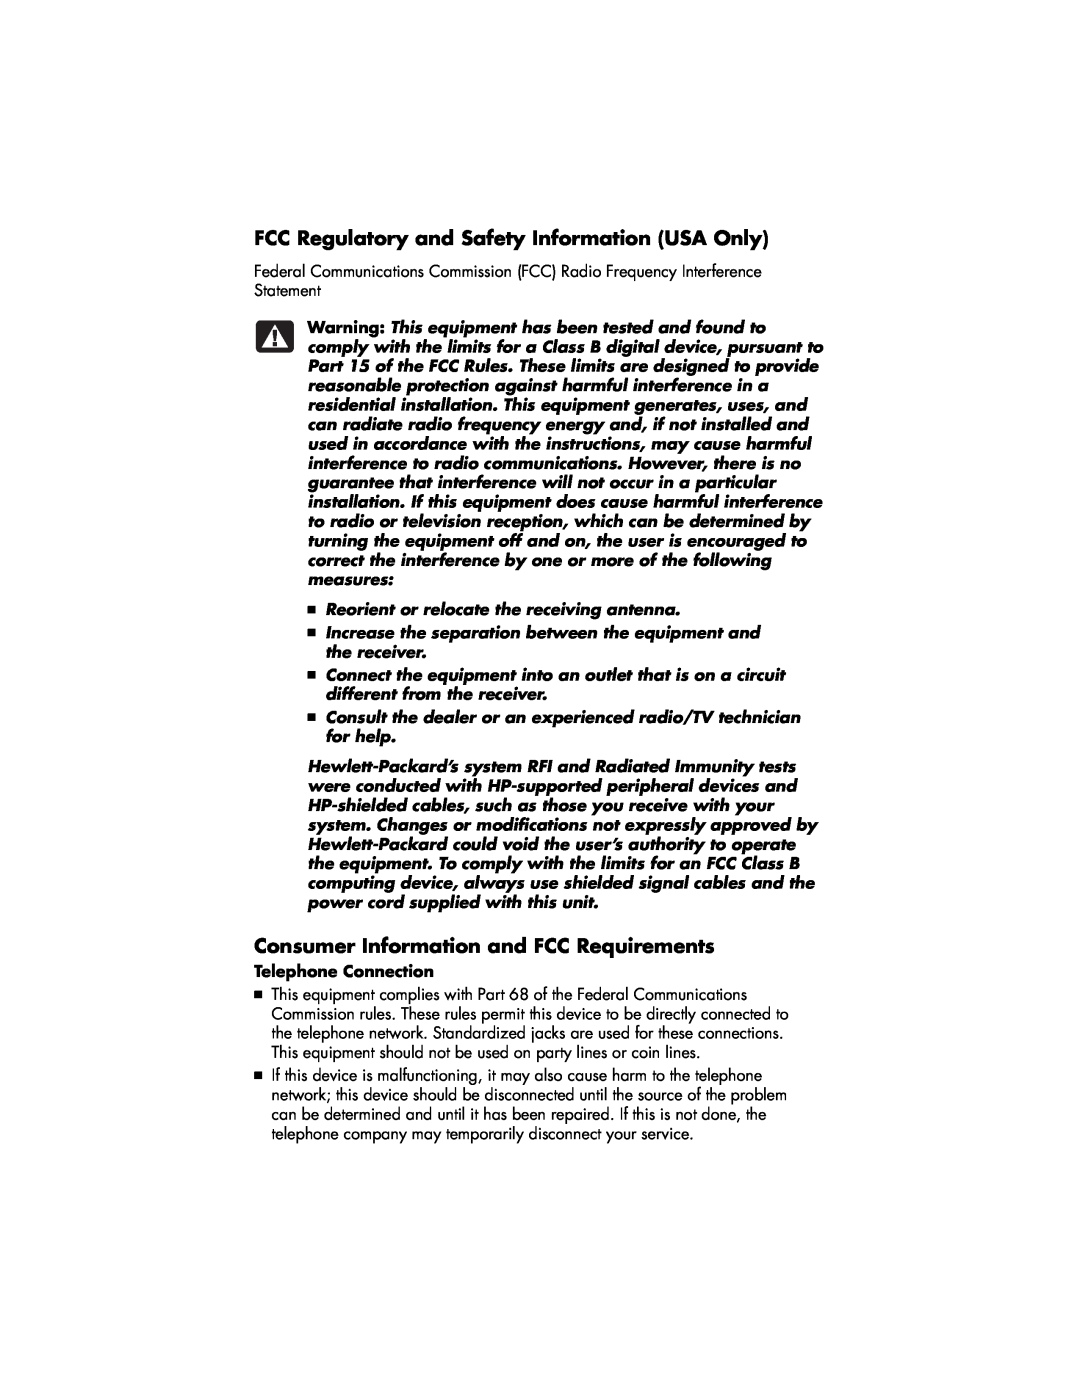 HP 744v (US/CAN), 734n (US/CAN) FCC Regulatory and Safety Information USA Only, Consumer Information and FCC Requirements 